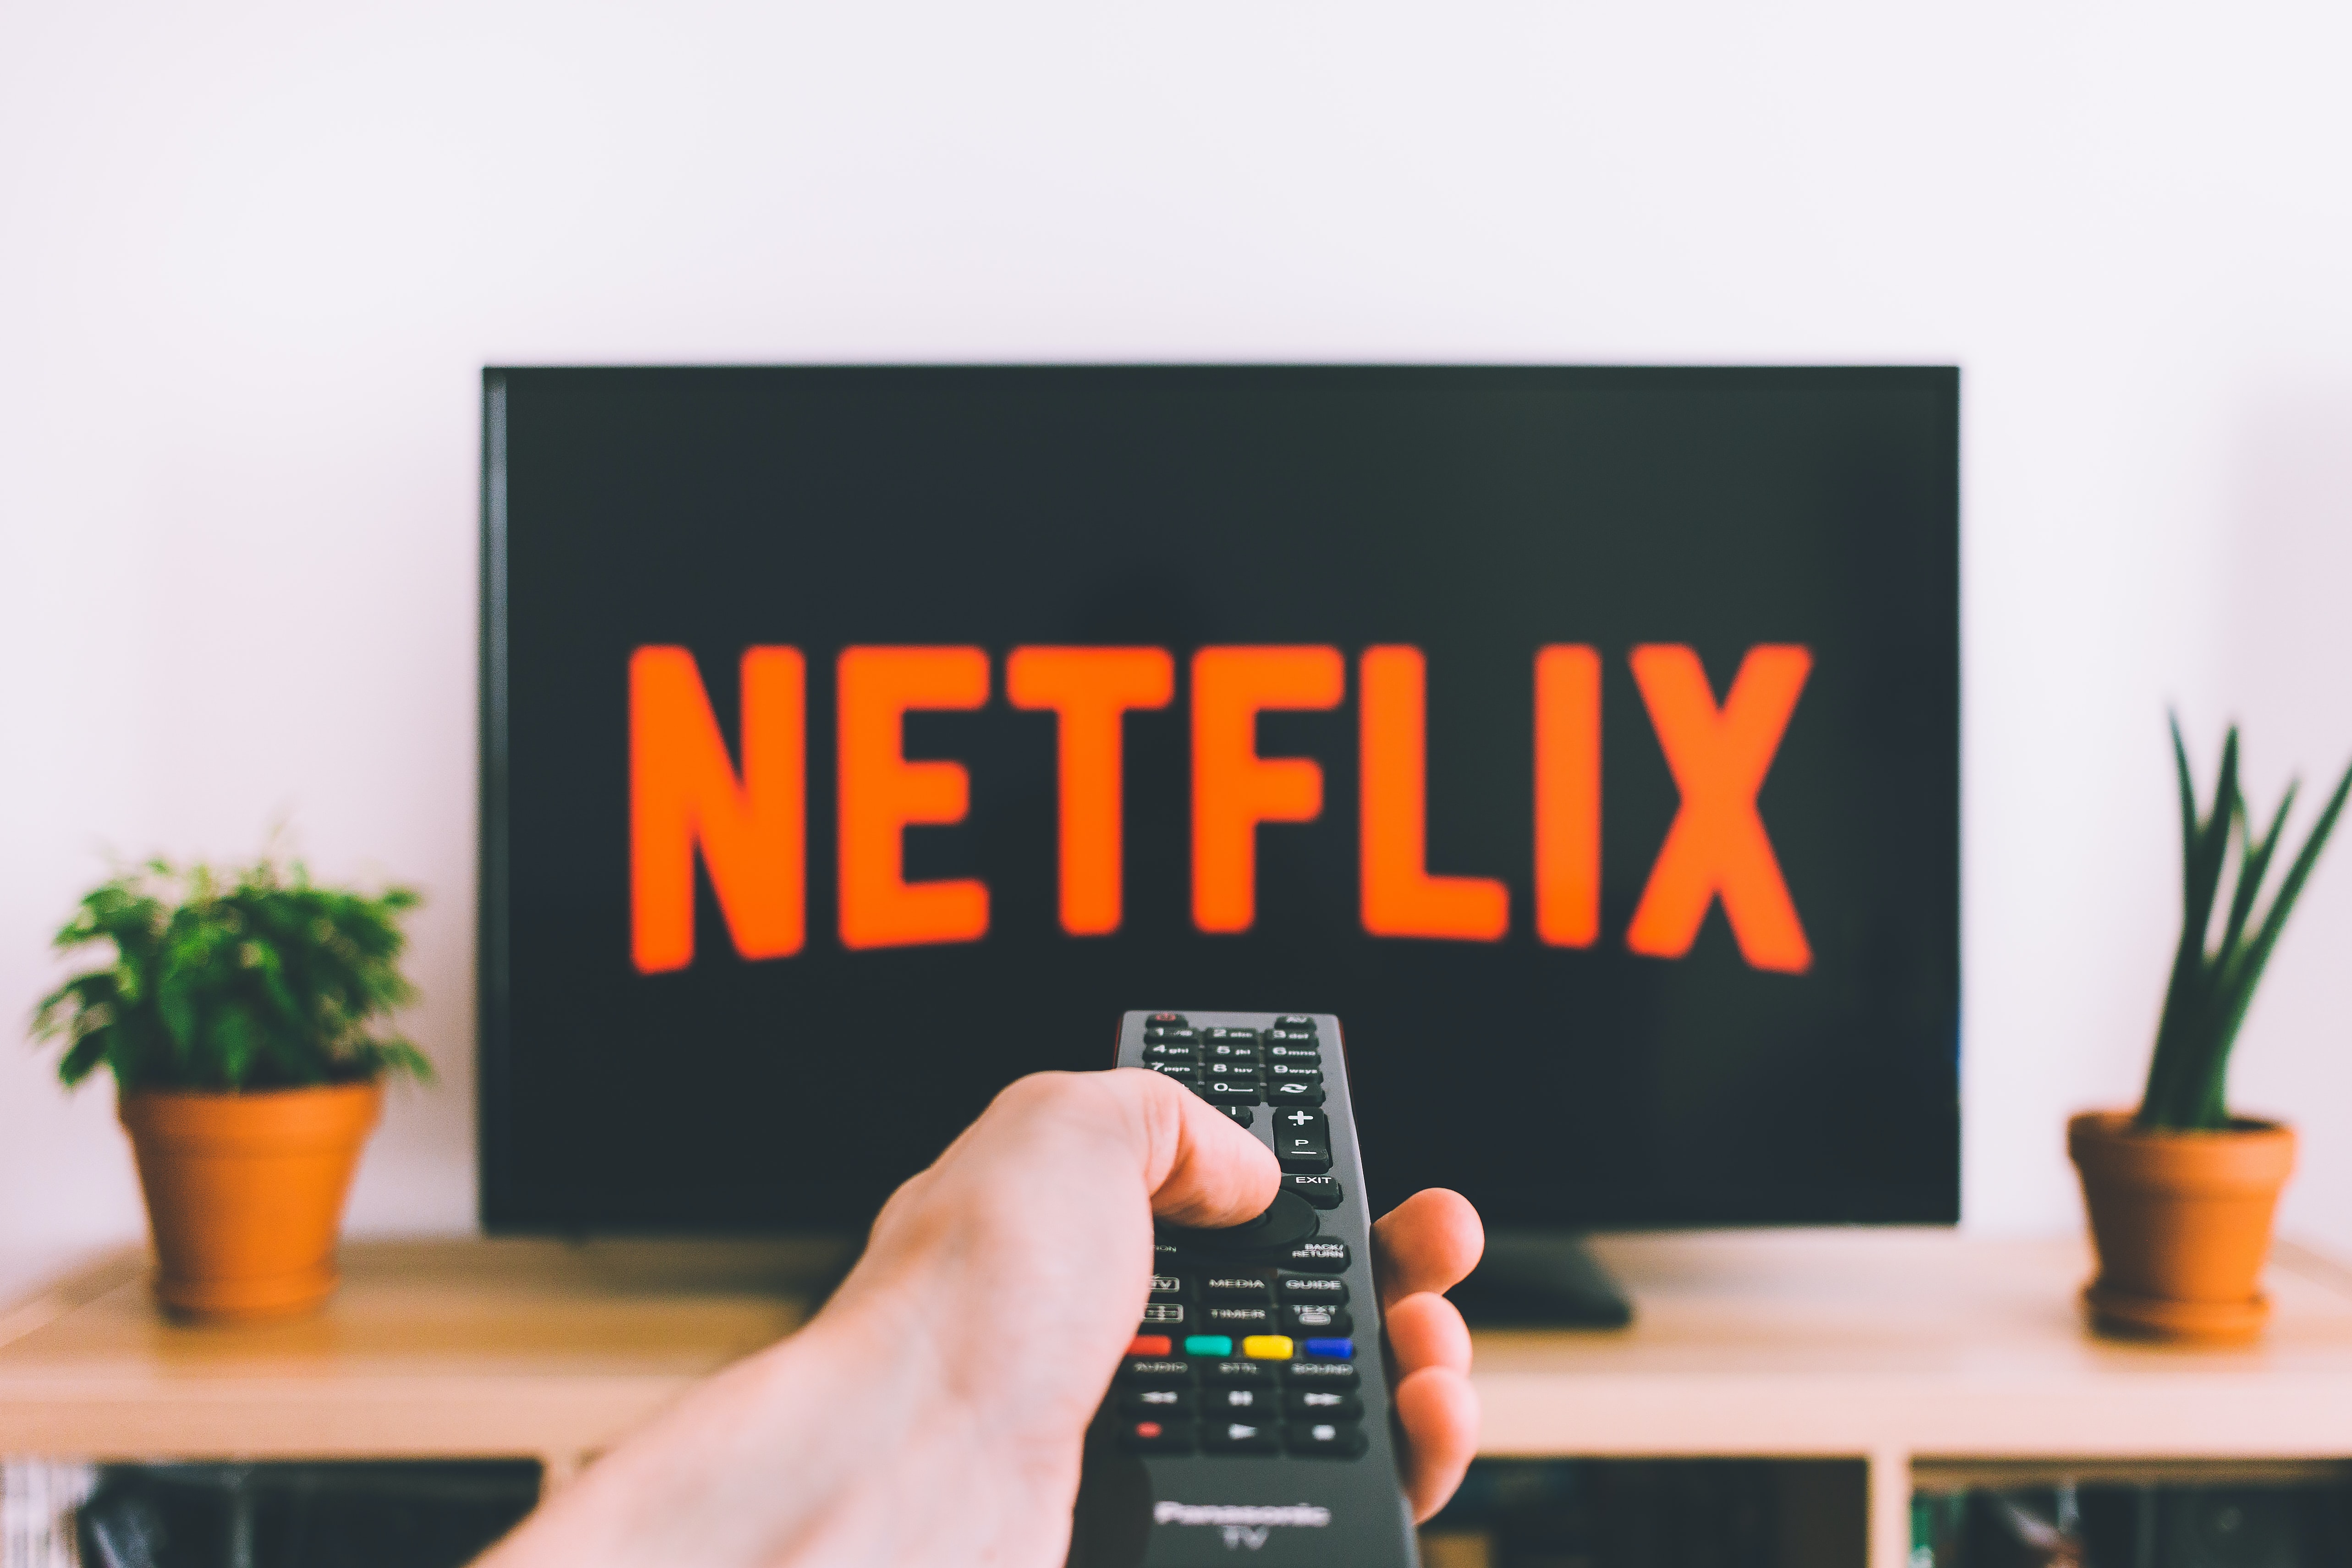 hand holding remote in front of TV screen displaying Netflix logo